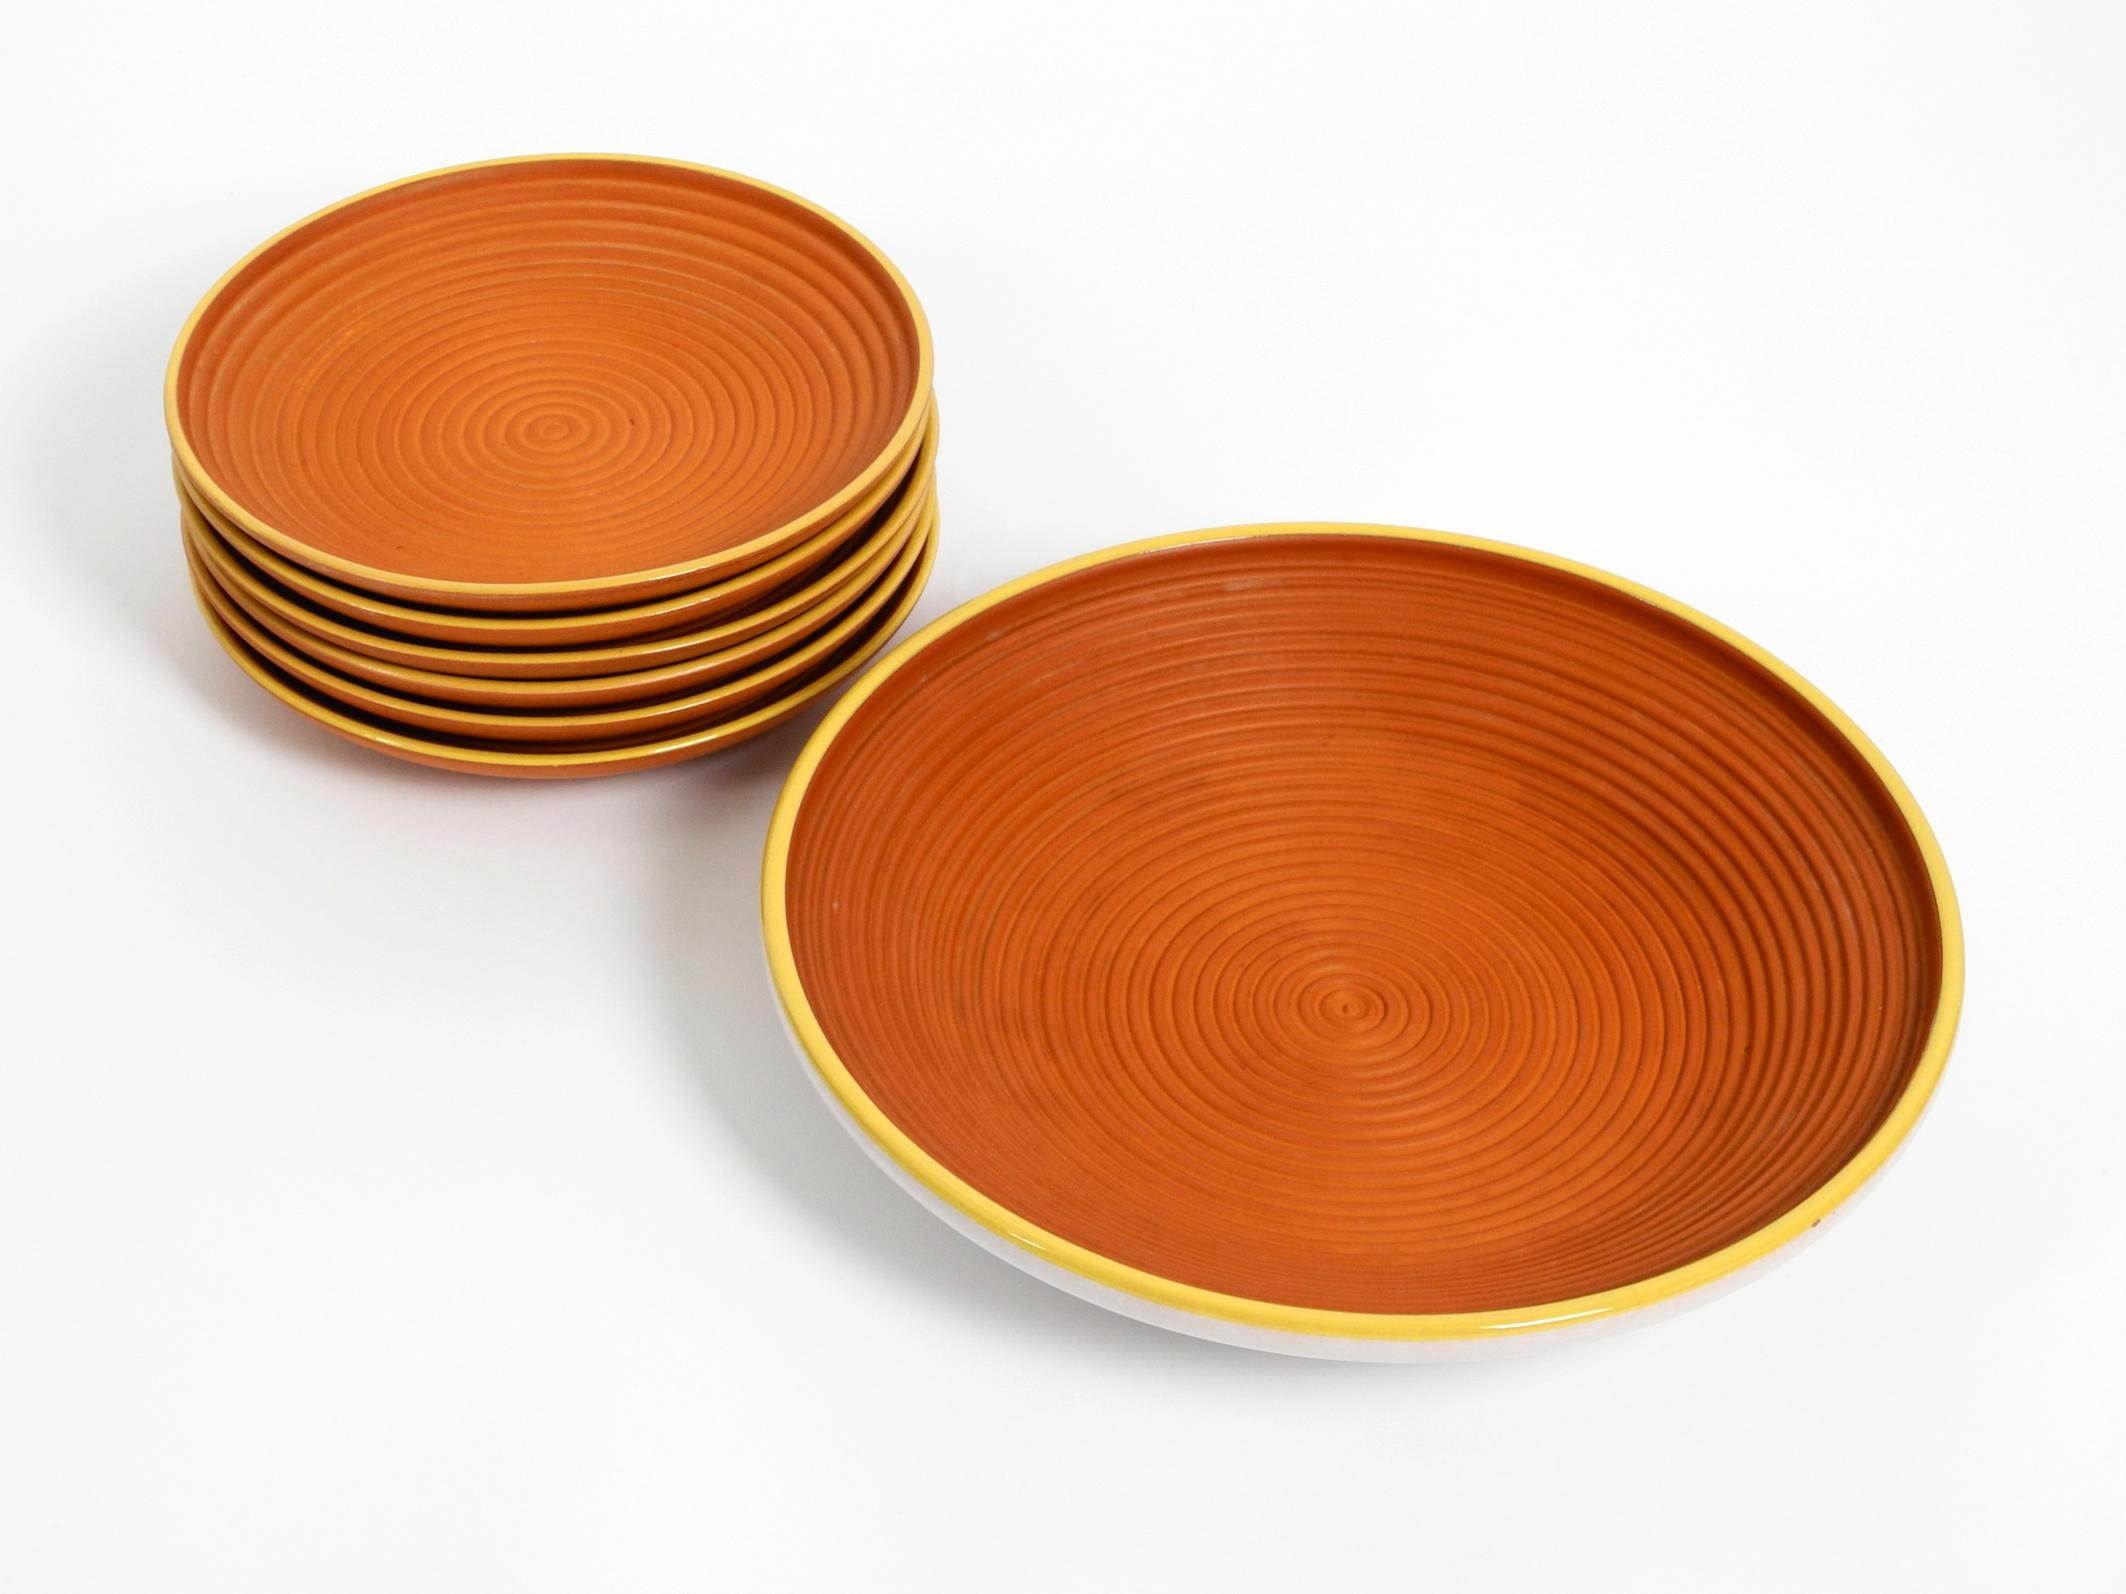 Seven Decorative Art Deco Rosenthal Ceramic Plates from the 1930s 6